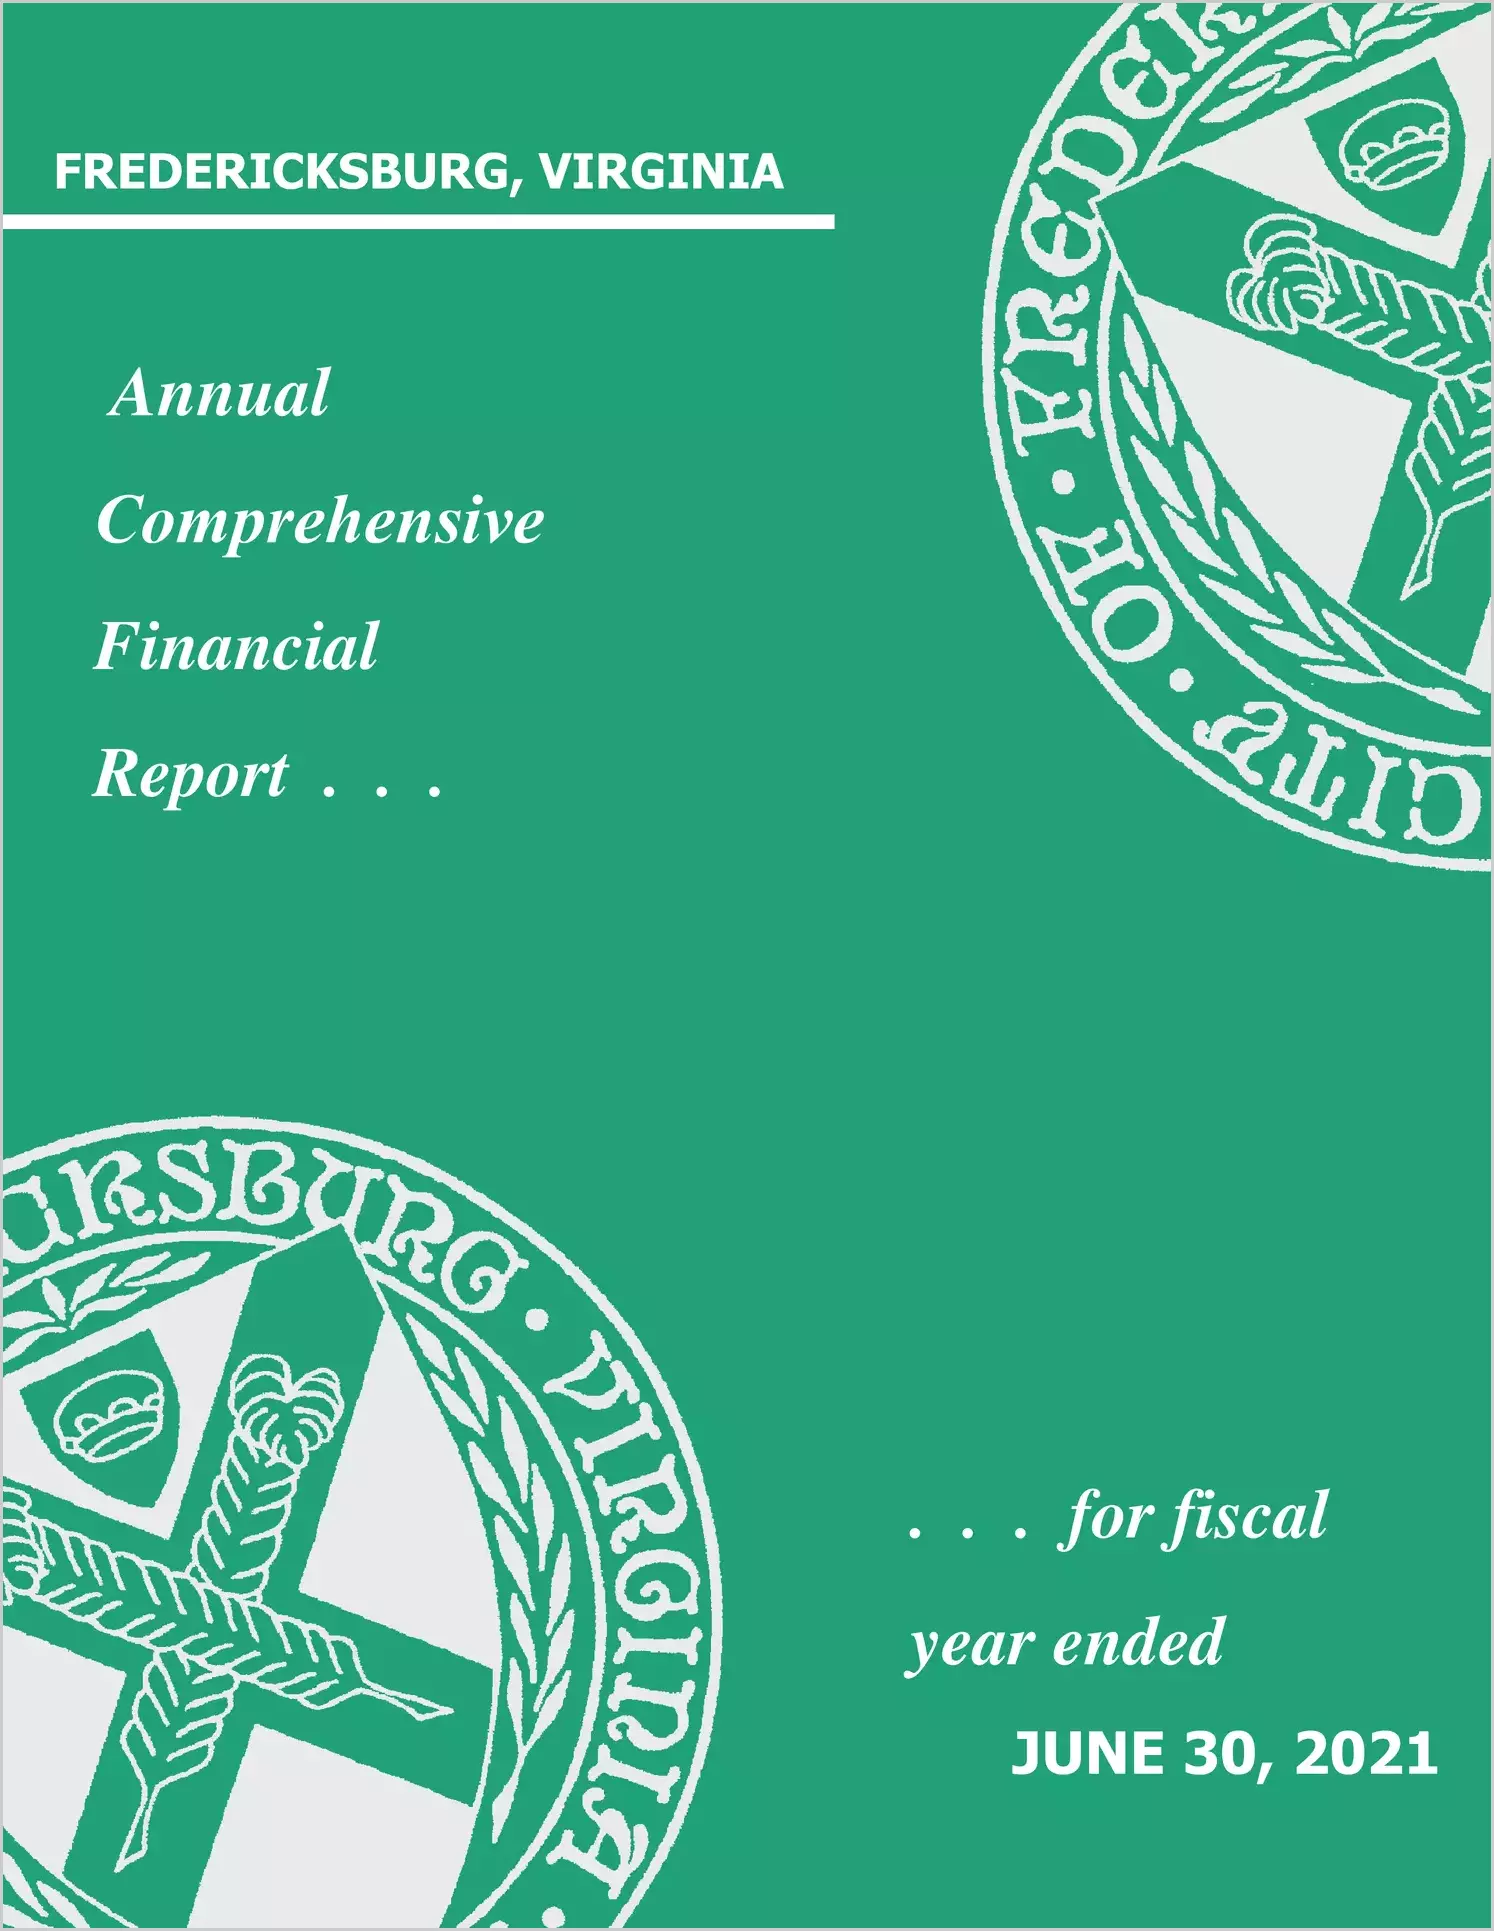 2021 Annual Financial Report for City of Fredericksburg